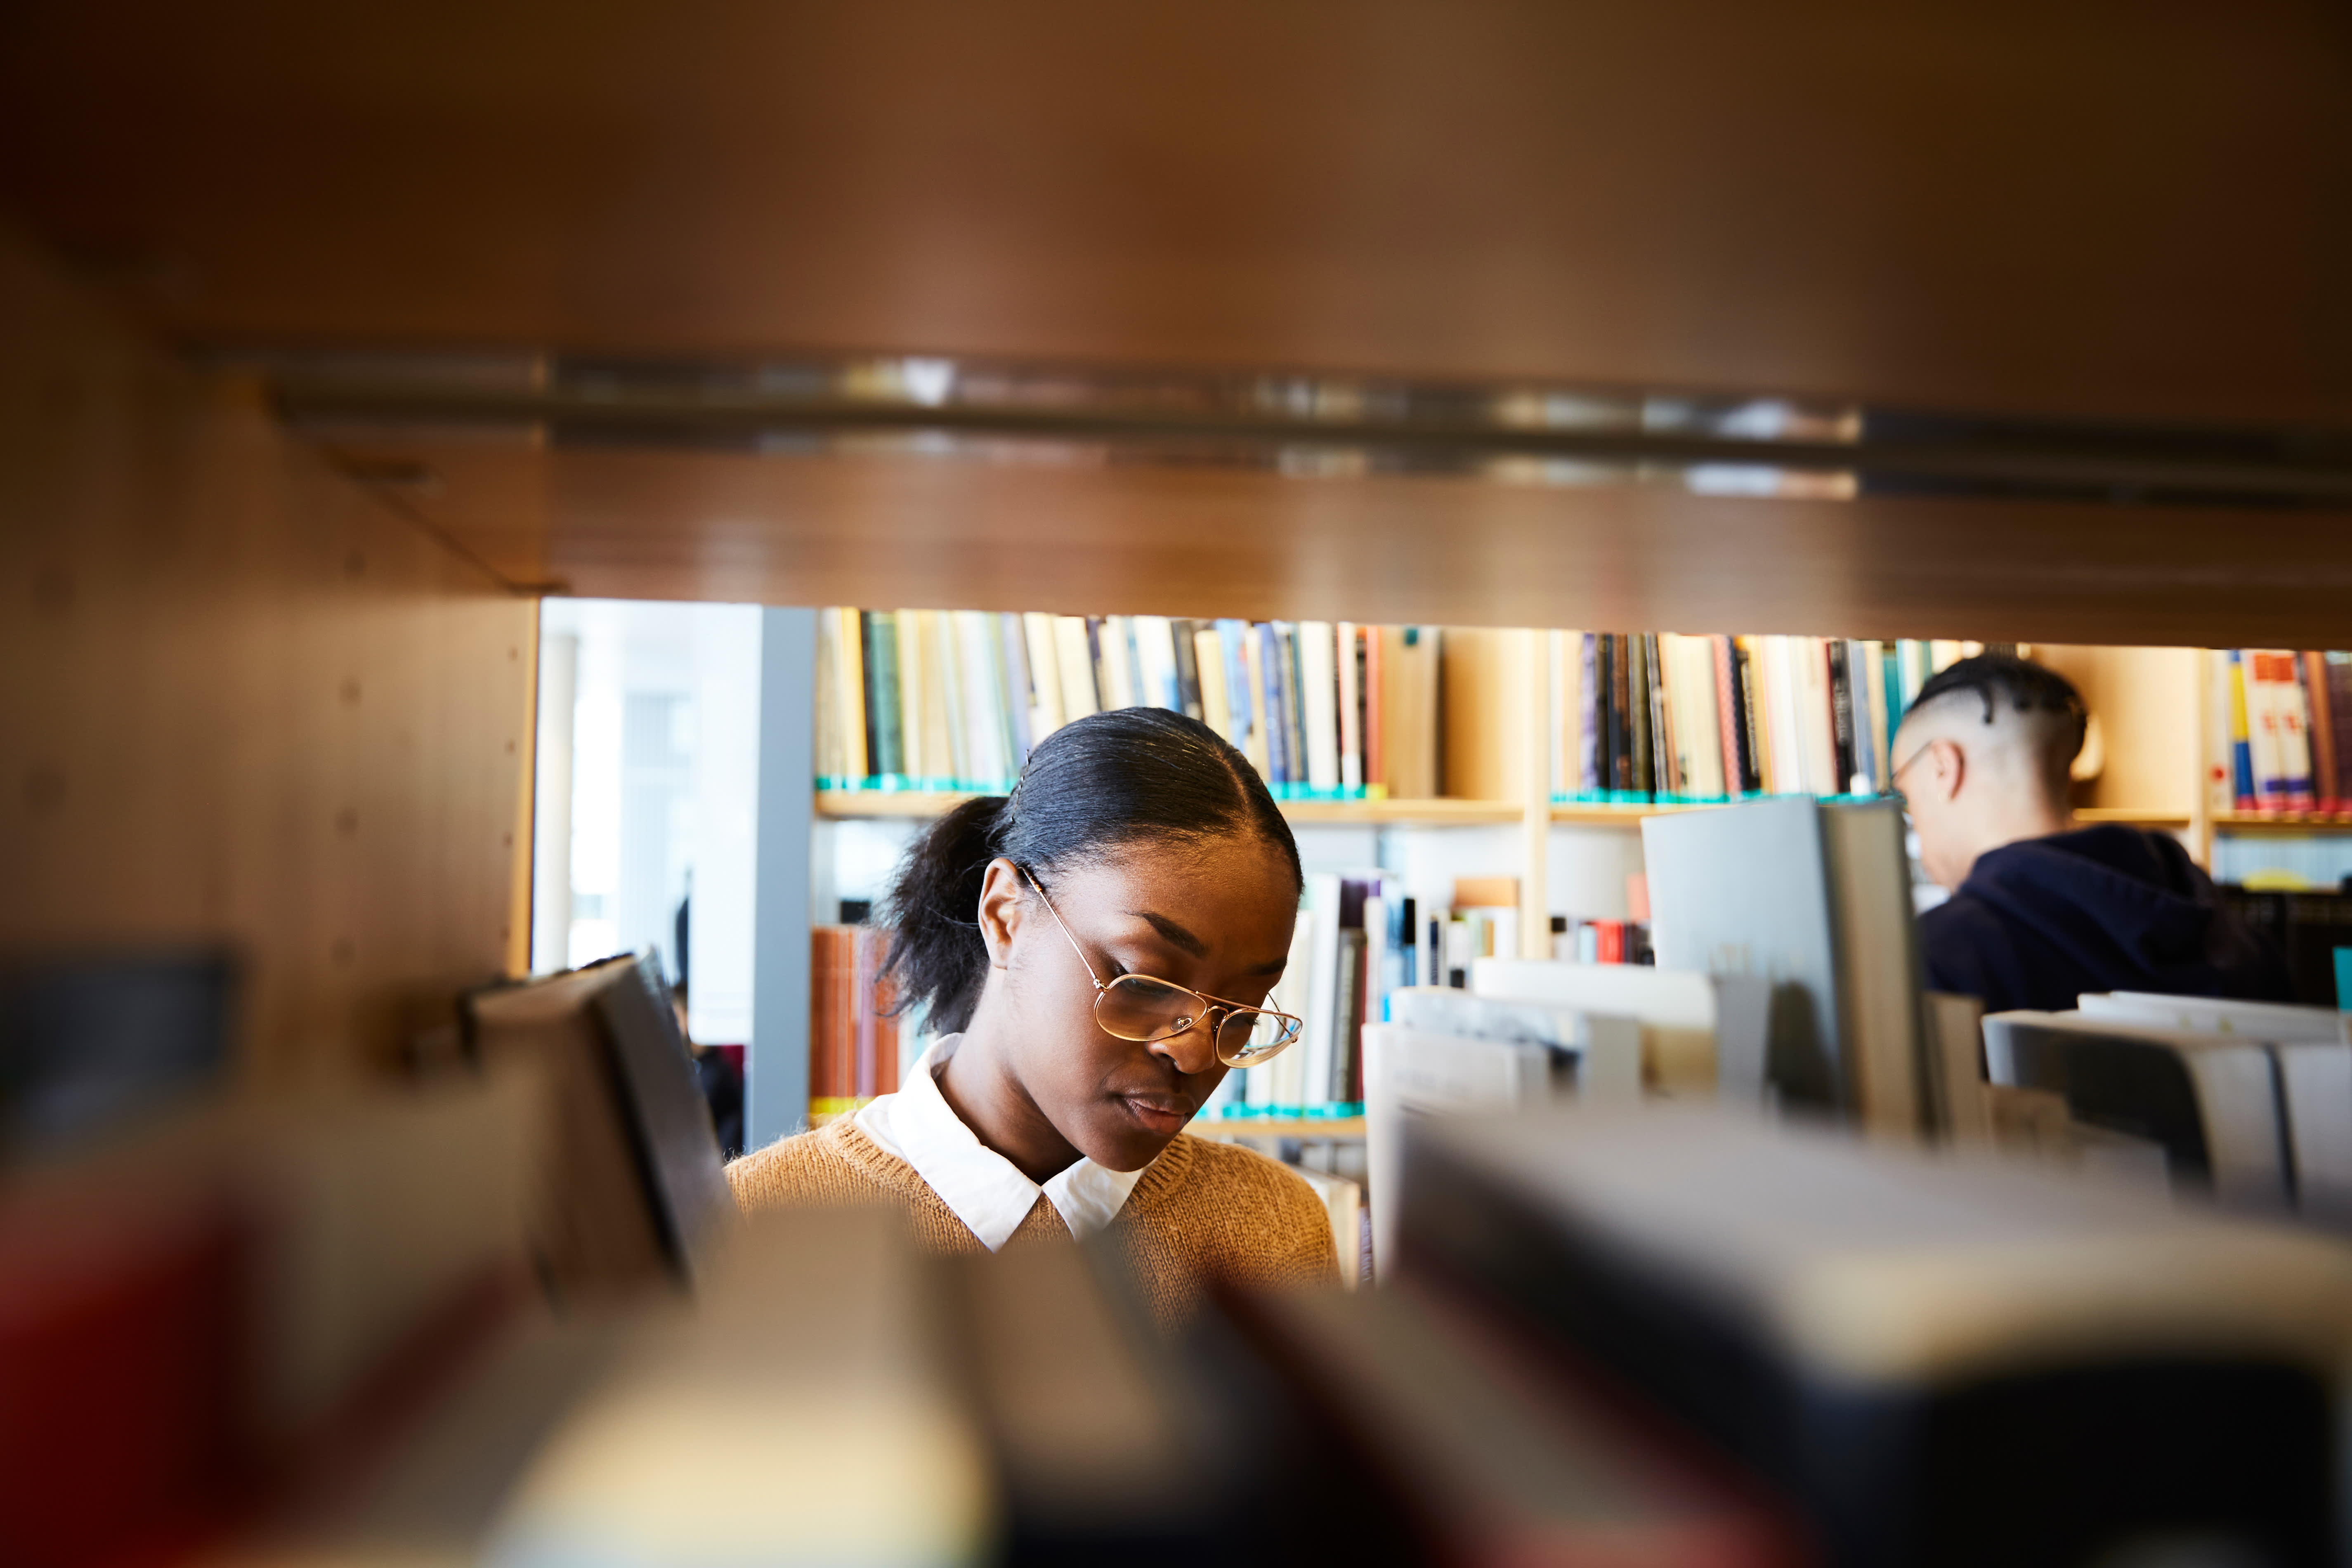 Image of student looking through books on a library shelf.